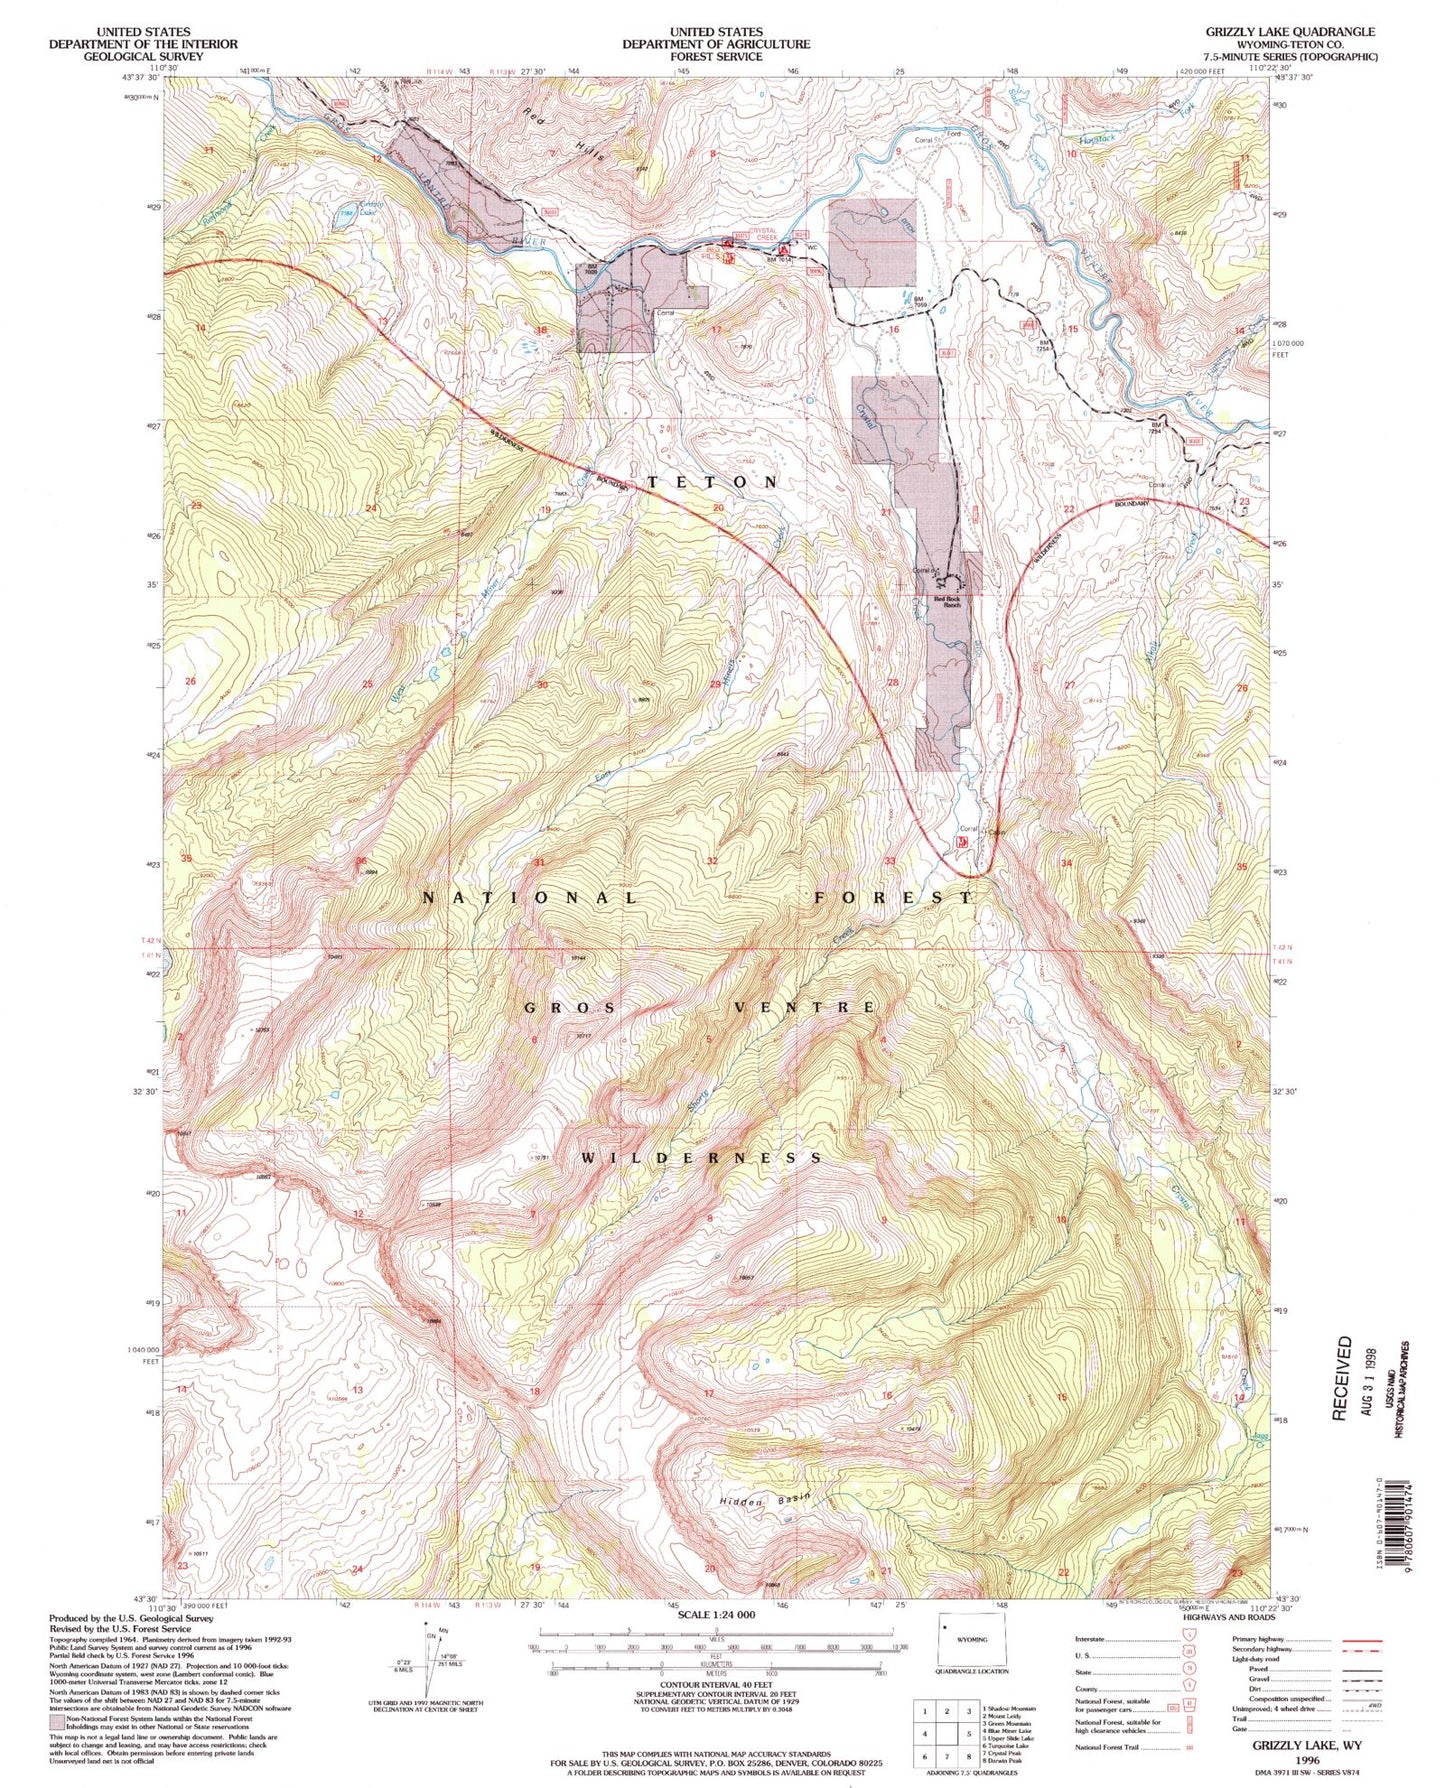 Classic USGS Grizzly Lake Wyoming 7.5'x7.5' Topo Map Image